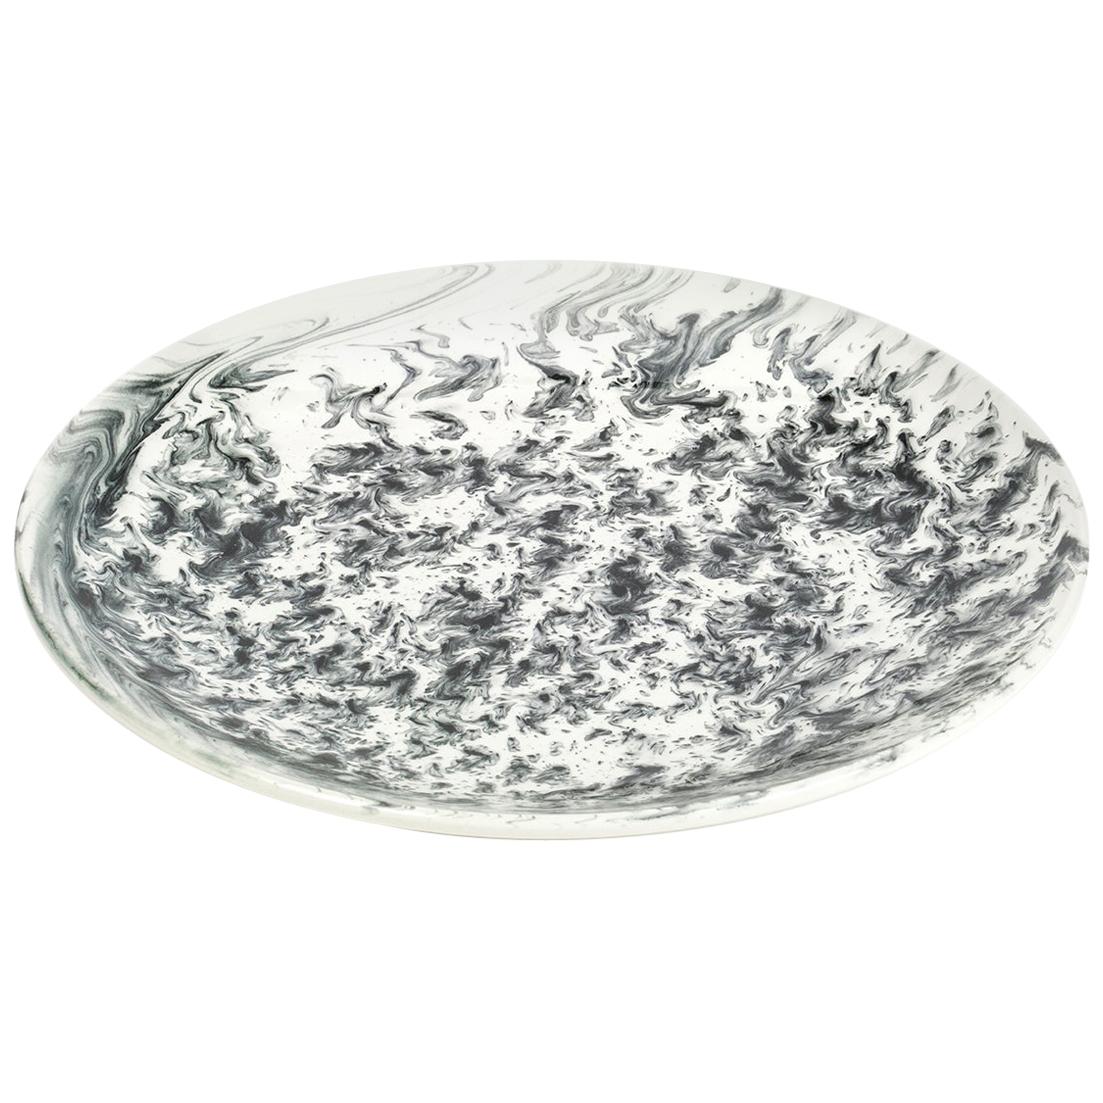 Hand Glazed Earthenware Dinner Plate with Unique Contemporary Design